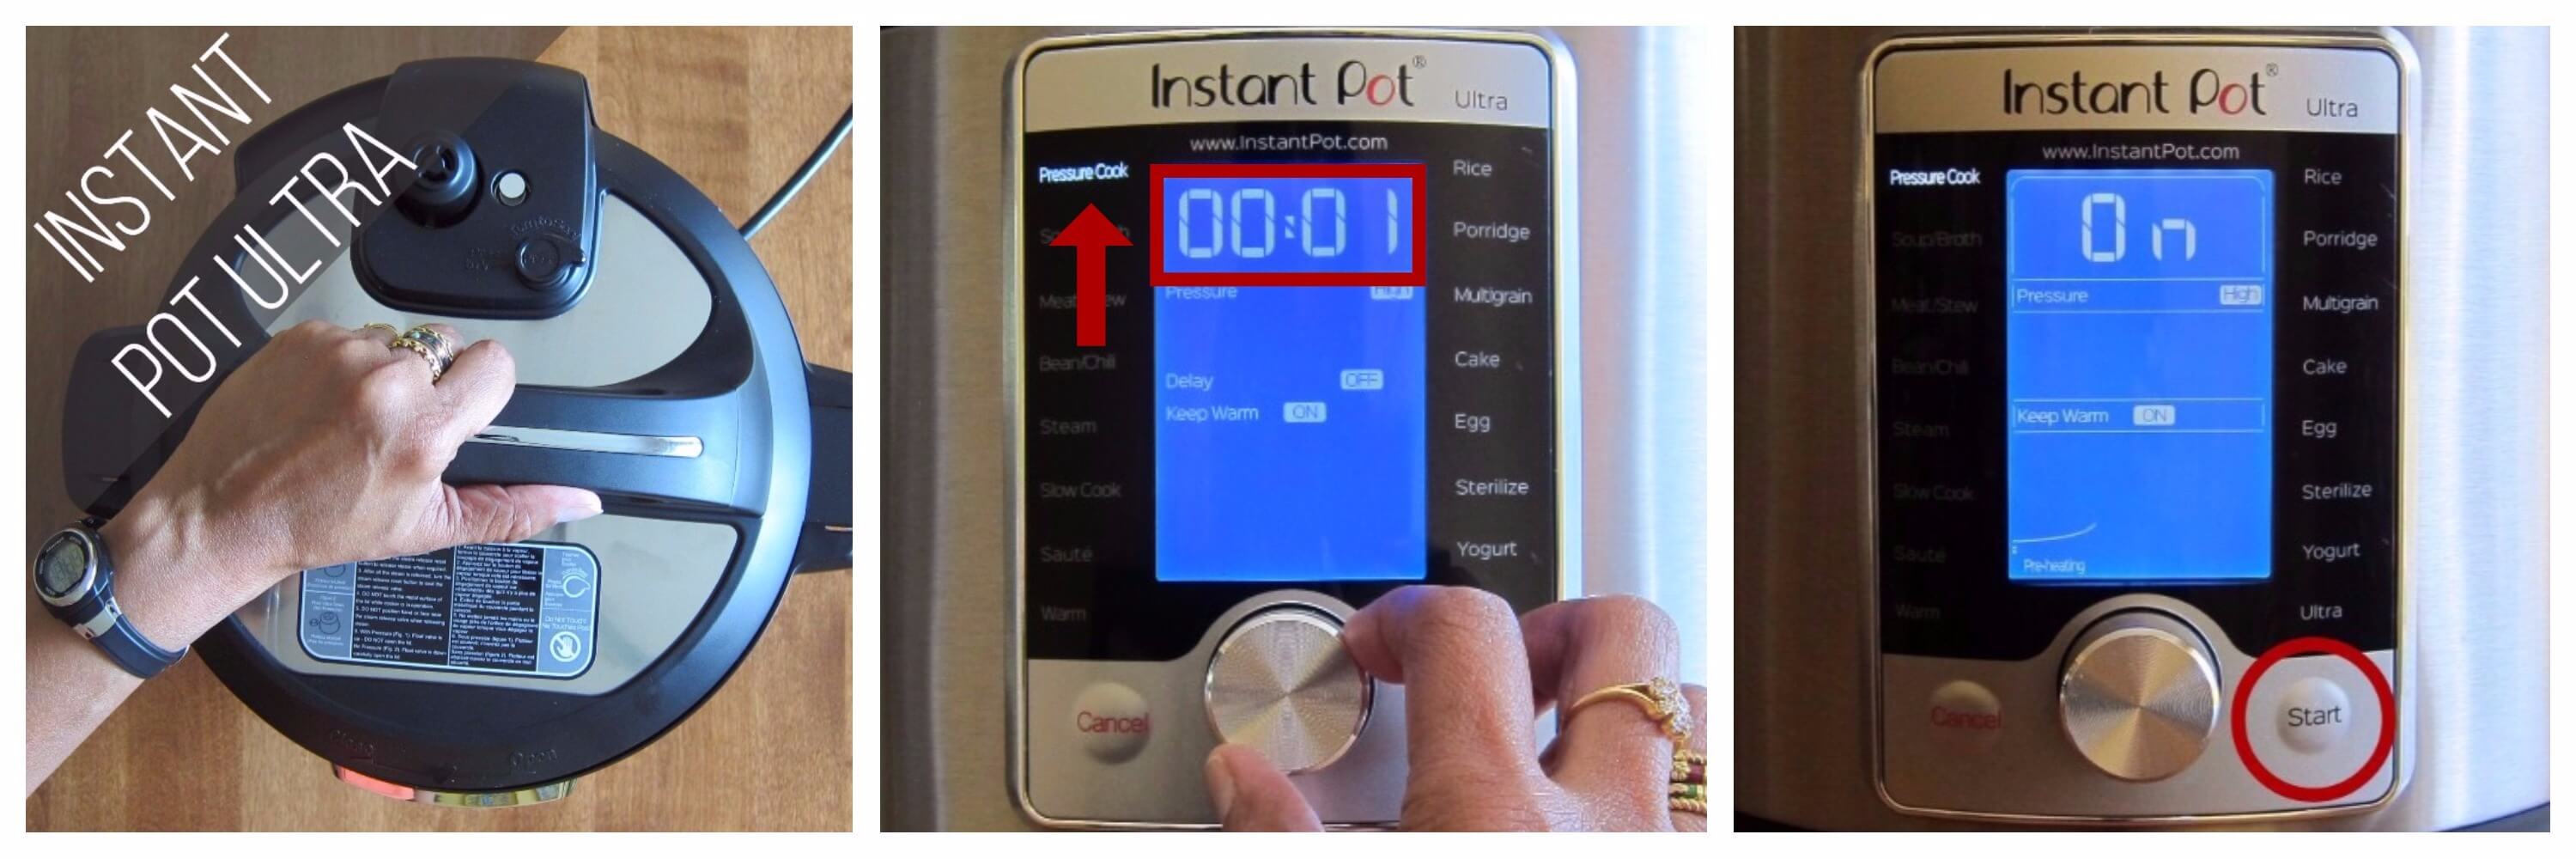 Instant Pot Ultra pressure cook 1 minute collage - close Instant Pot Ultra, set time to 00:01 and select Pressure Cook, press start - Paint the Kitchen Red